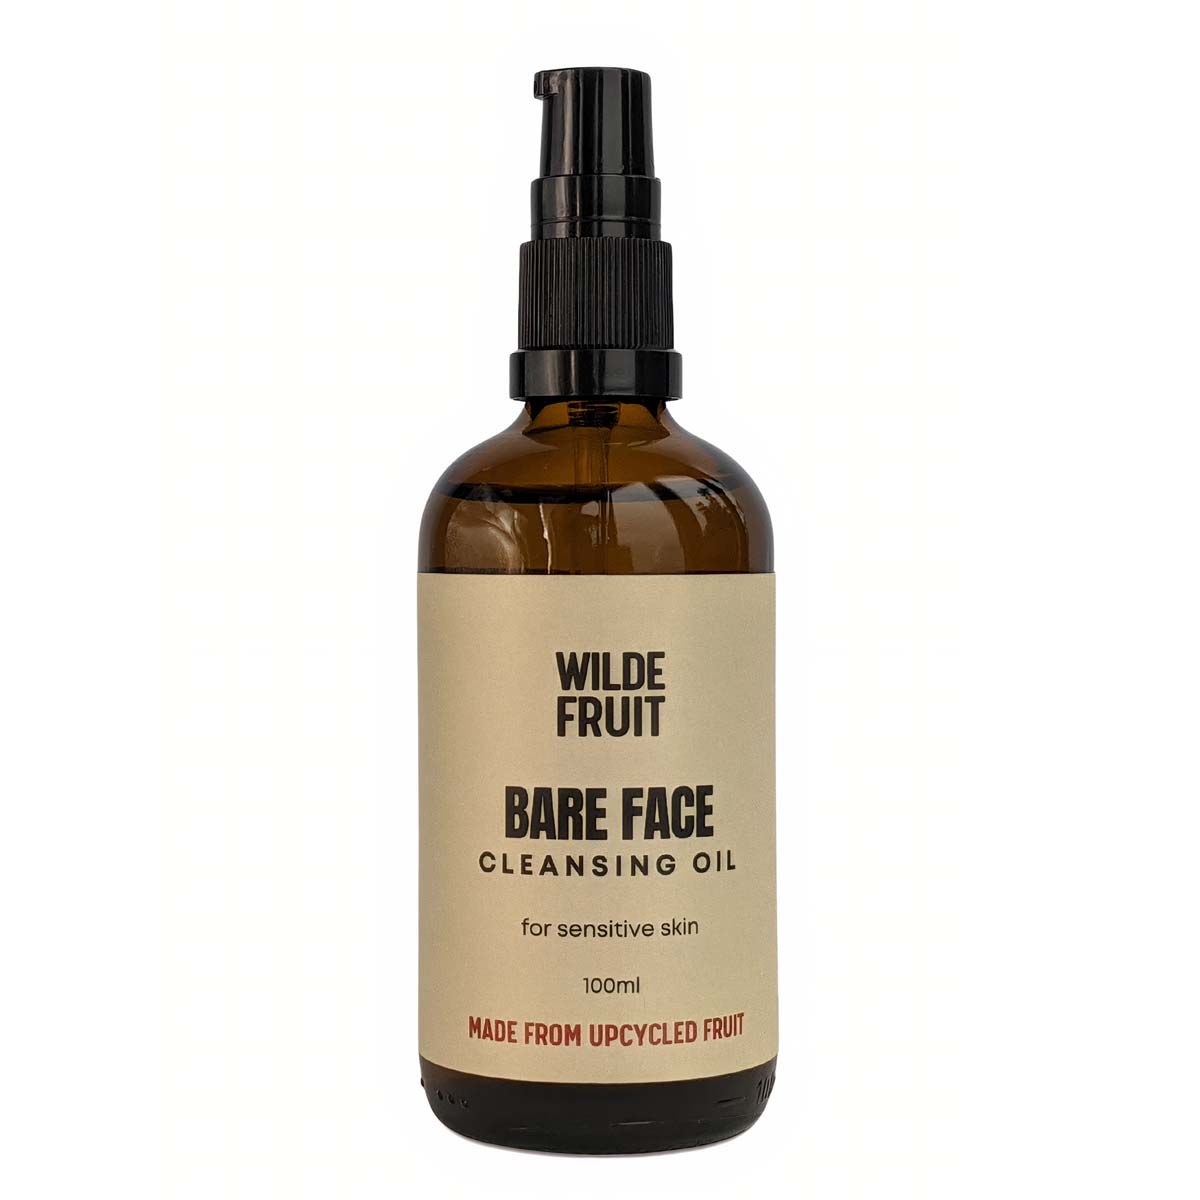 Bare Face Cleansing Oil